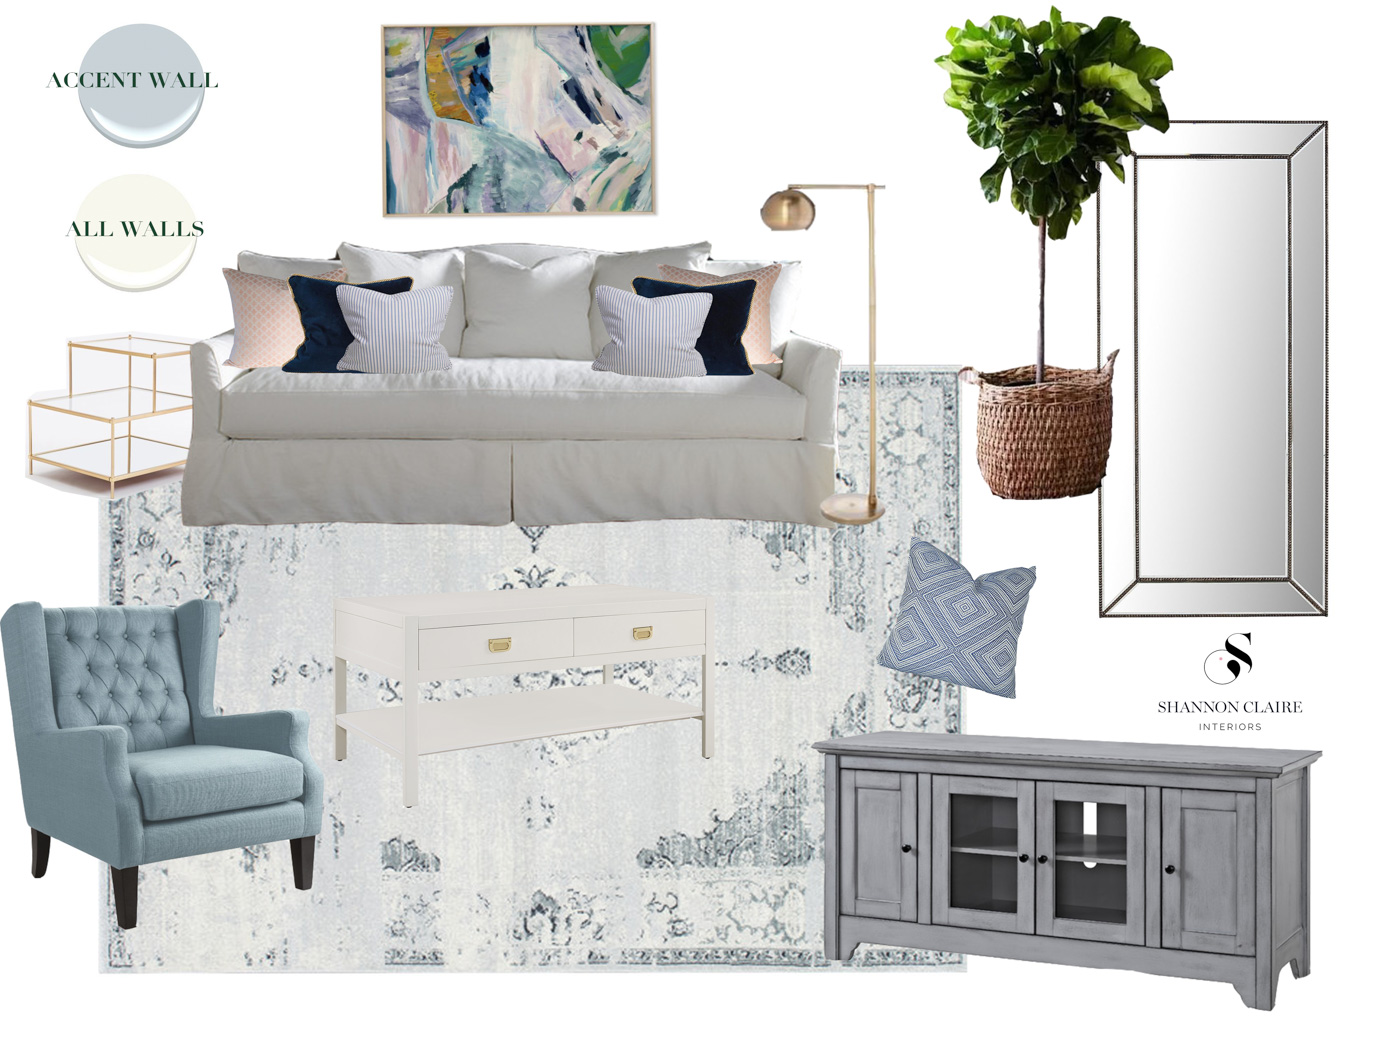 Bright Airy Living Room Design Board | Blue and White Living Room | Louella Reese Life & Style Blog